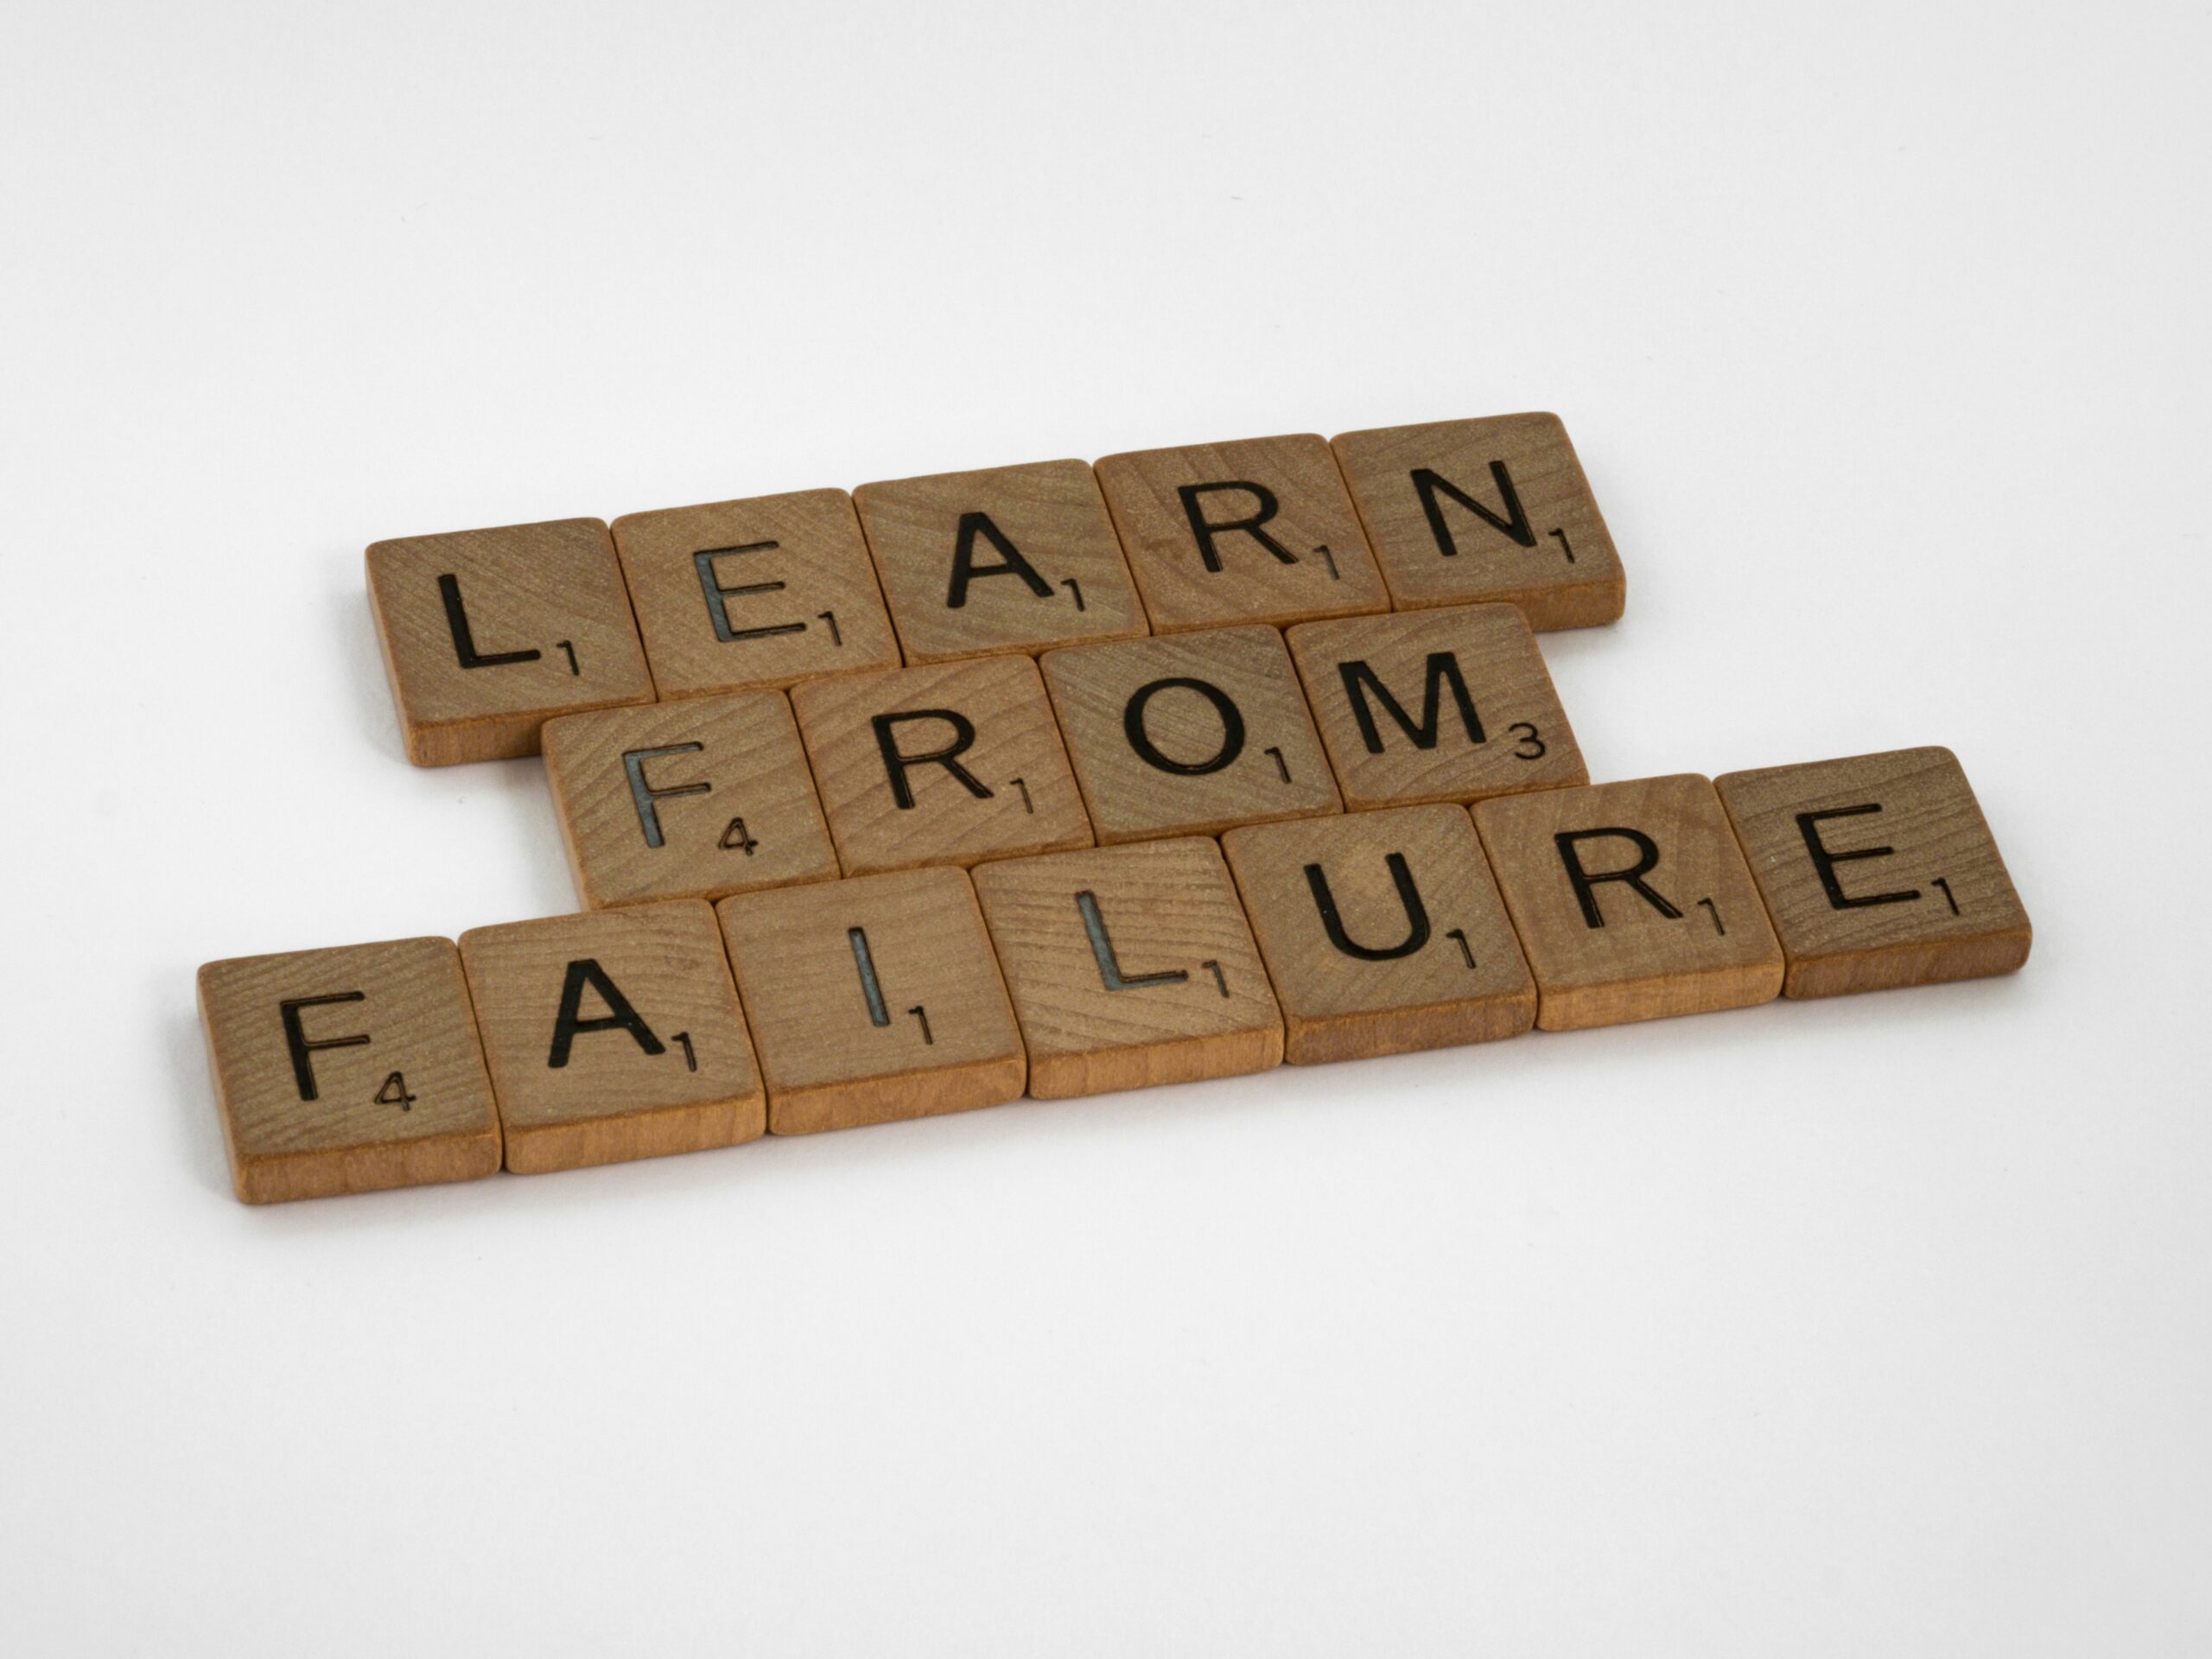 "Learn From Failure" Visualized with Scrabble pieces